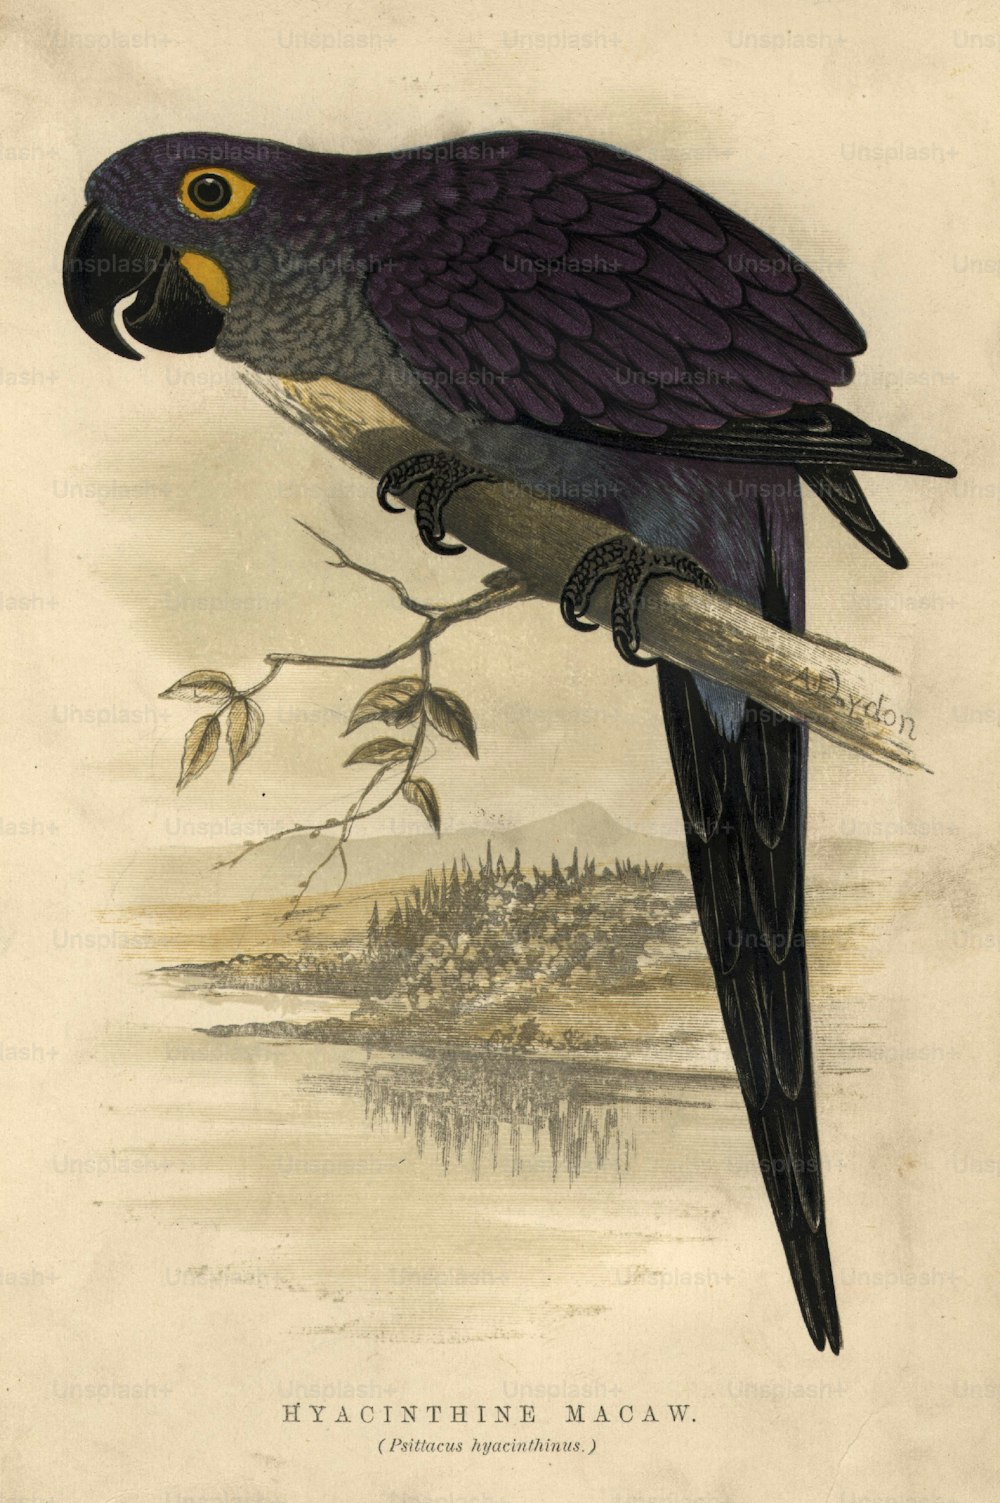 circa 1880:  Psittacus hyacinthinus, or hyacinthine macaw.  (Photo by Hulton Archive/Getty Images)